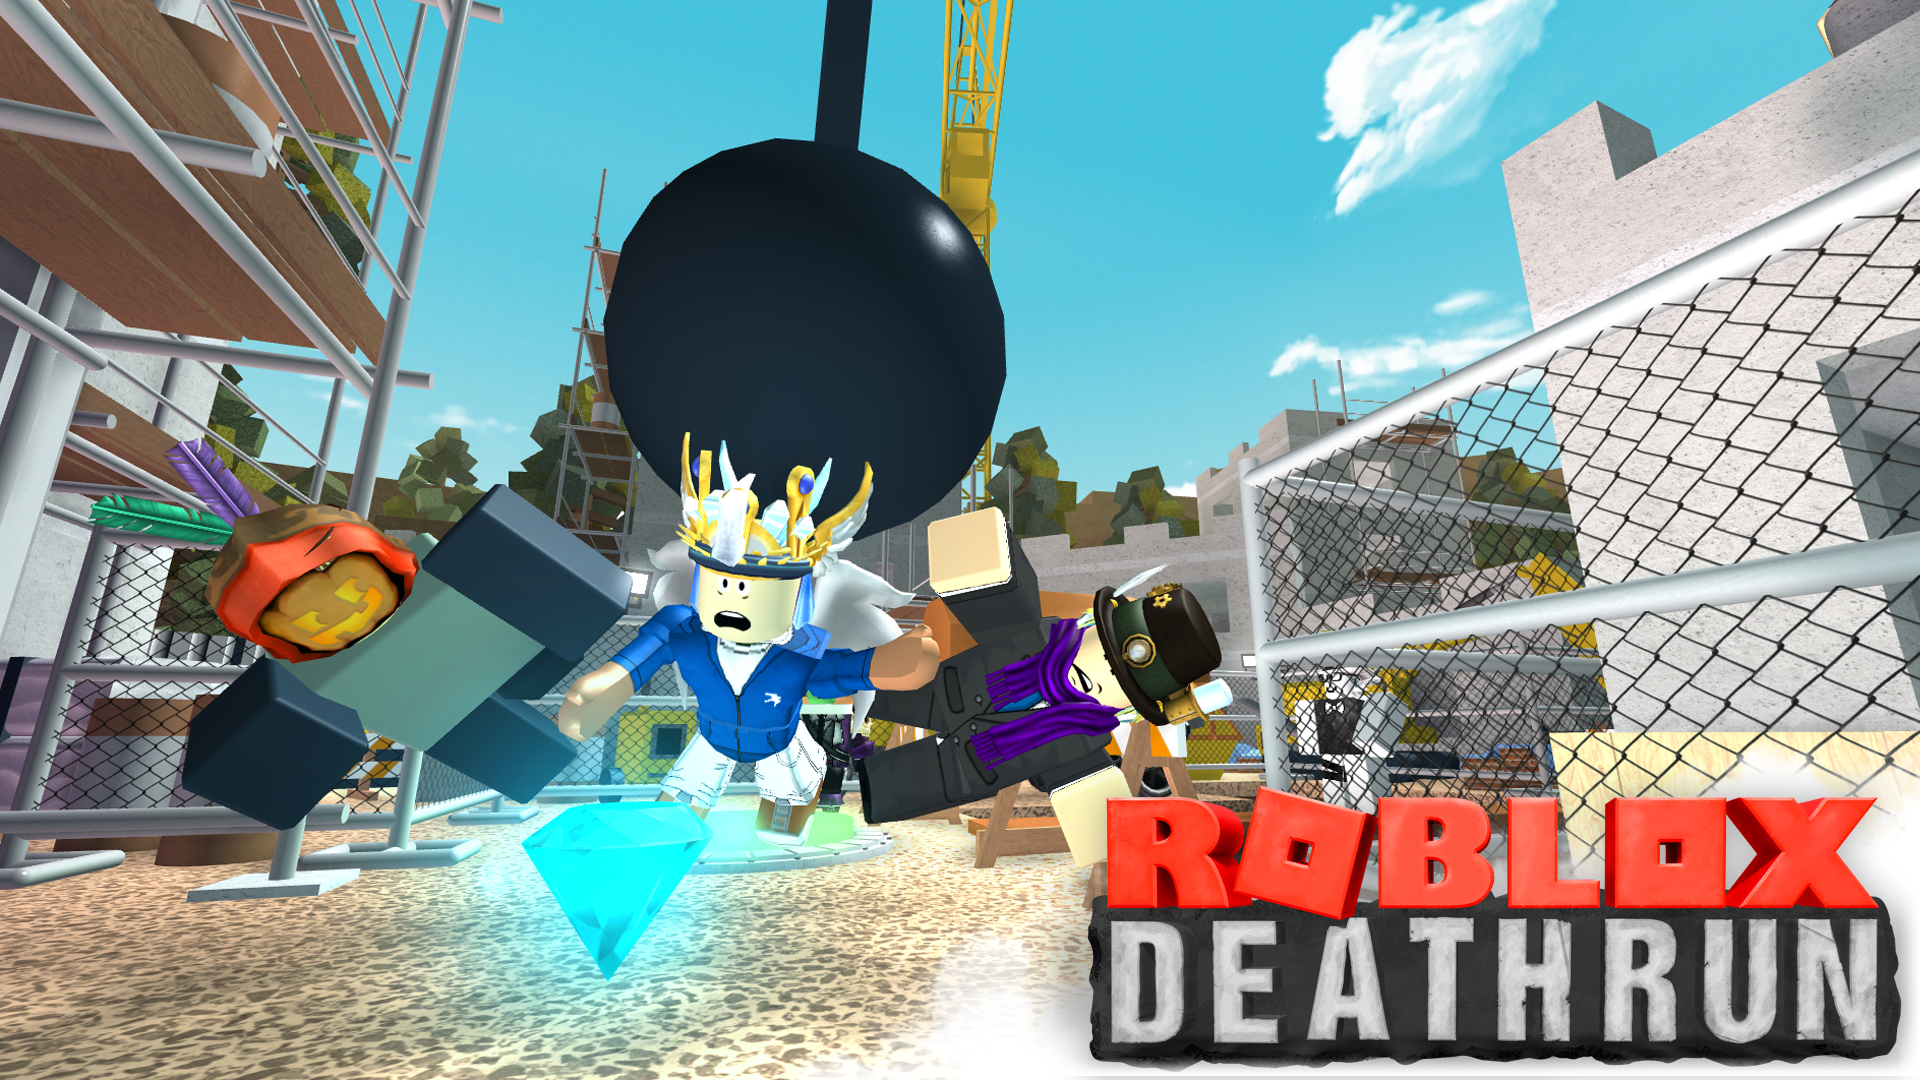 DEATHRUN TV download the new